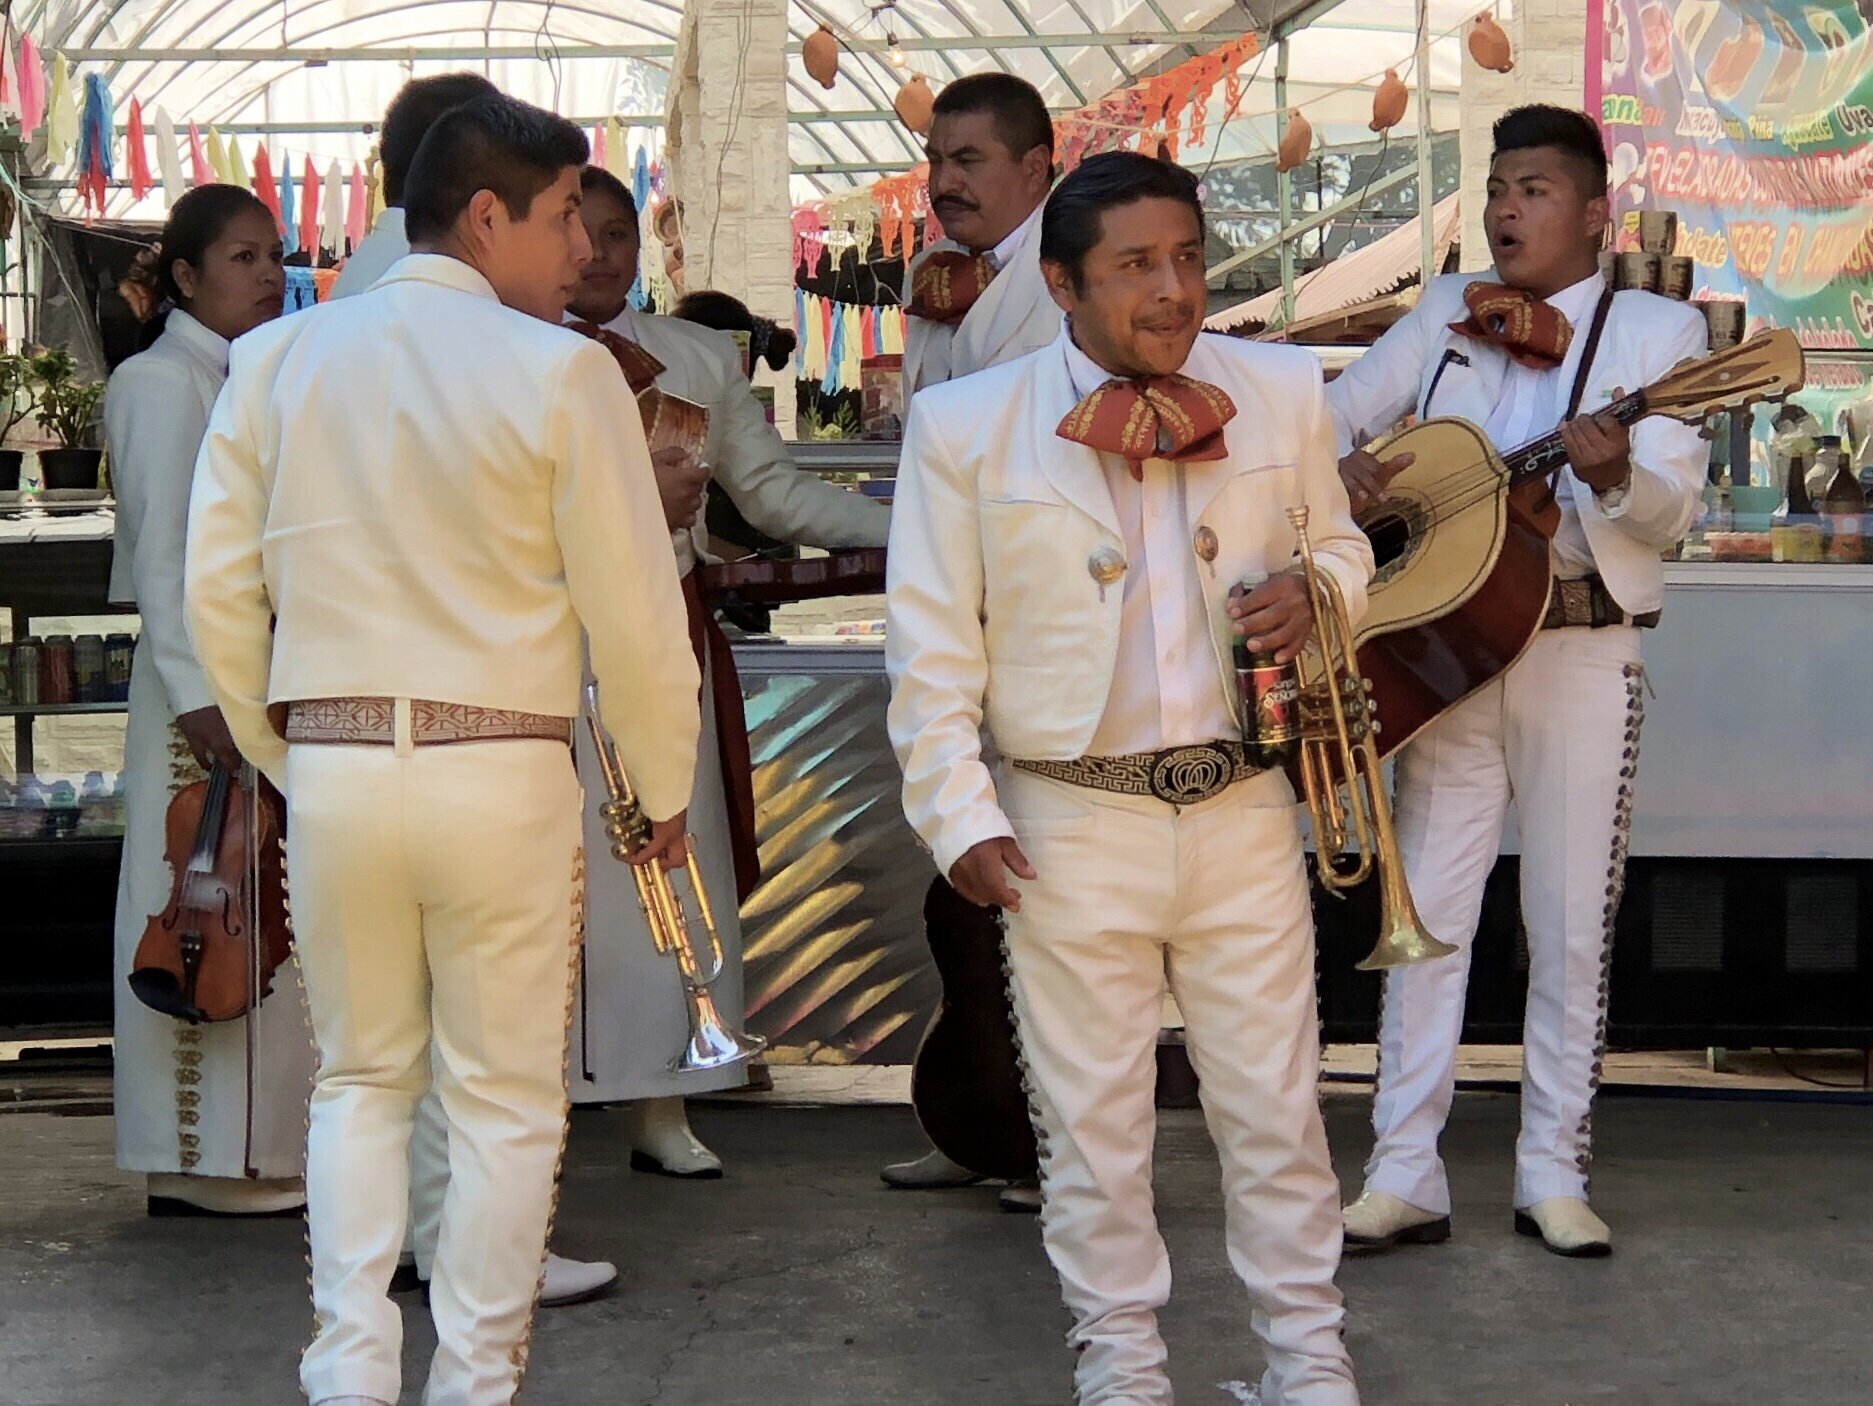 Hire a mariachi band and have a dance party aboard your trajinera.